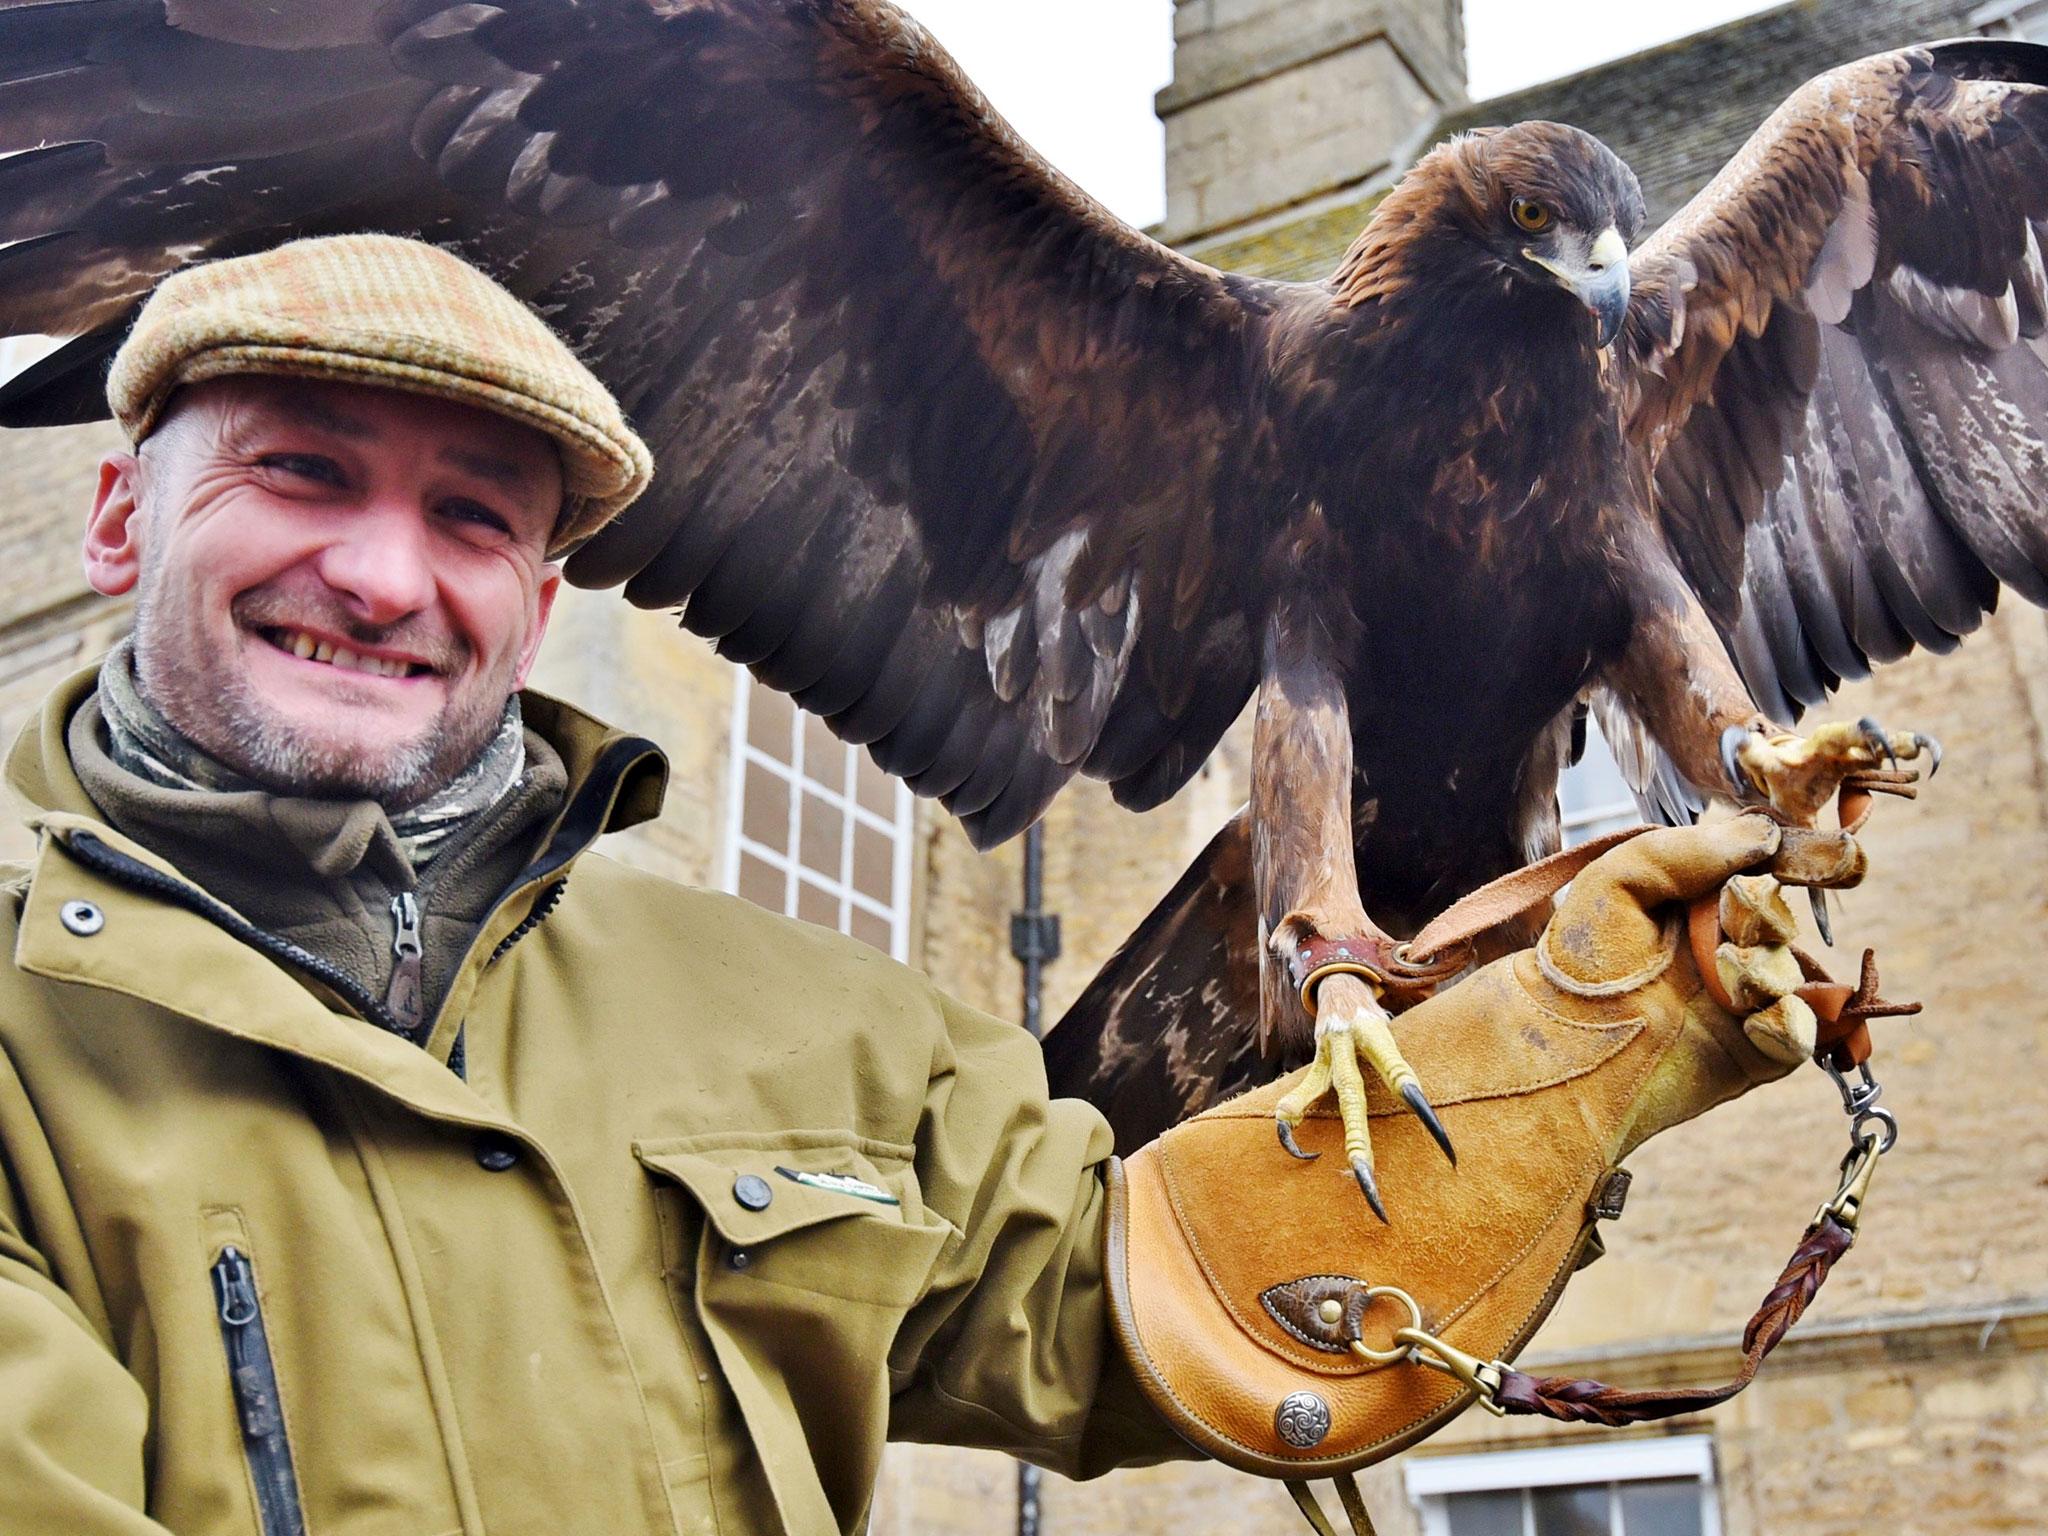 John Mease with his eagle